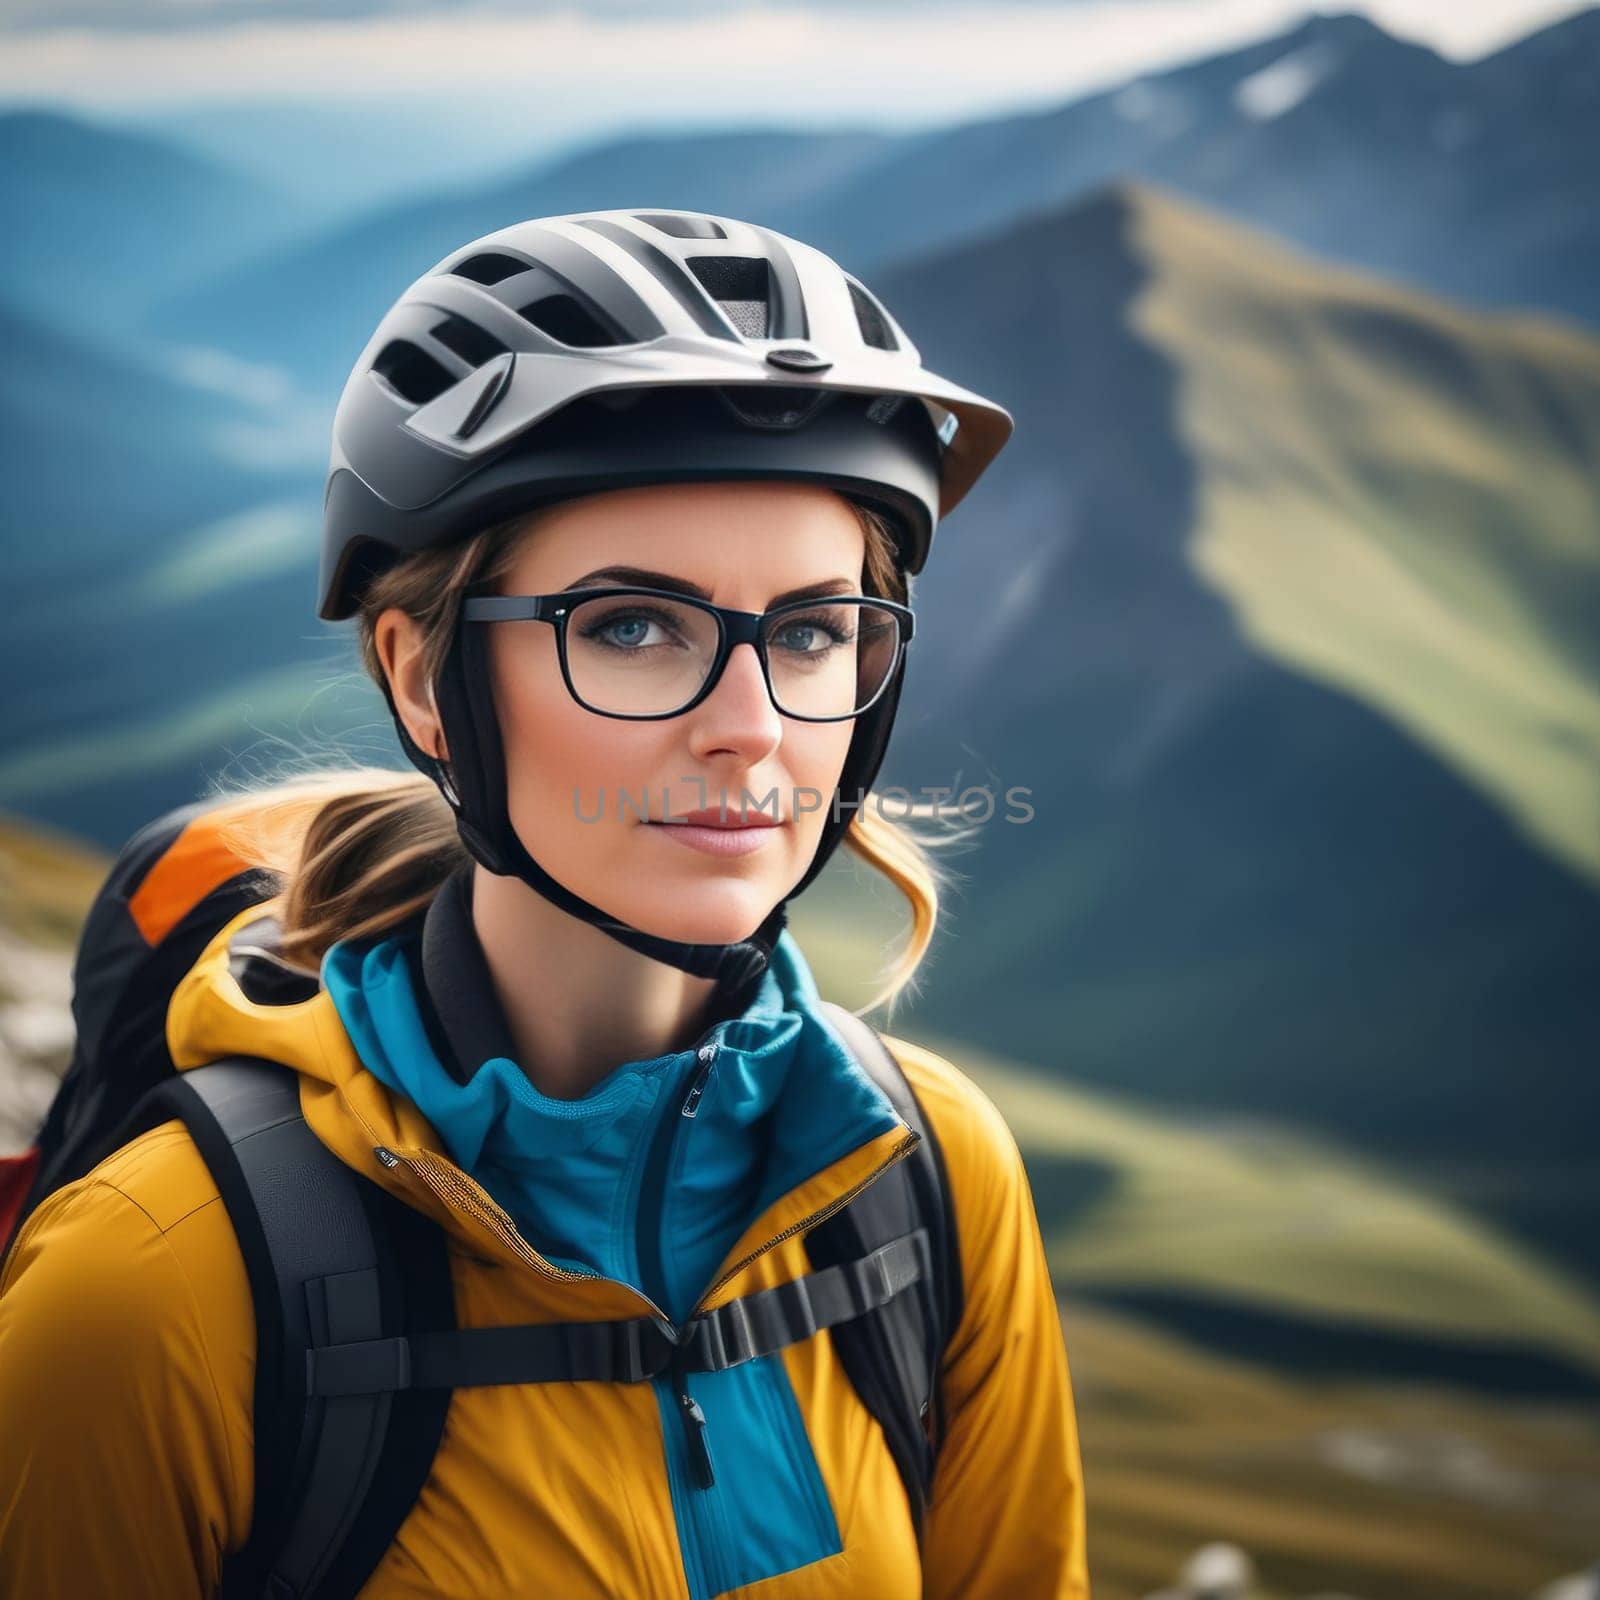 Woman wearing helmet and glasses stands confidently before towering mountain backdrop ready for adventure and exploration.She may be gearing up for bicycle ride or some other outdoor activity. by Angelsmoon